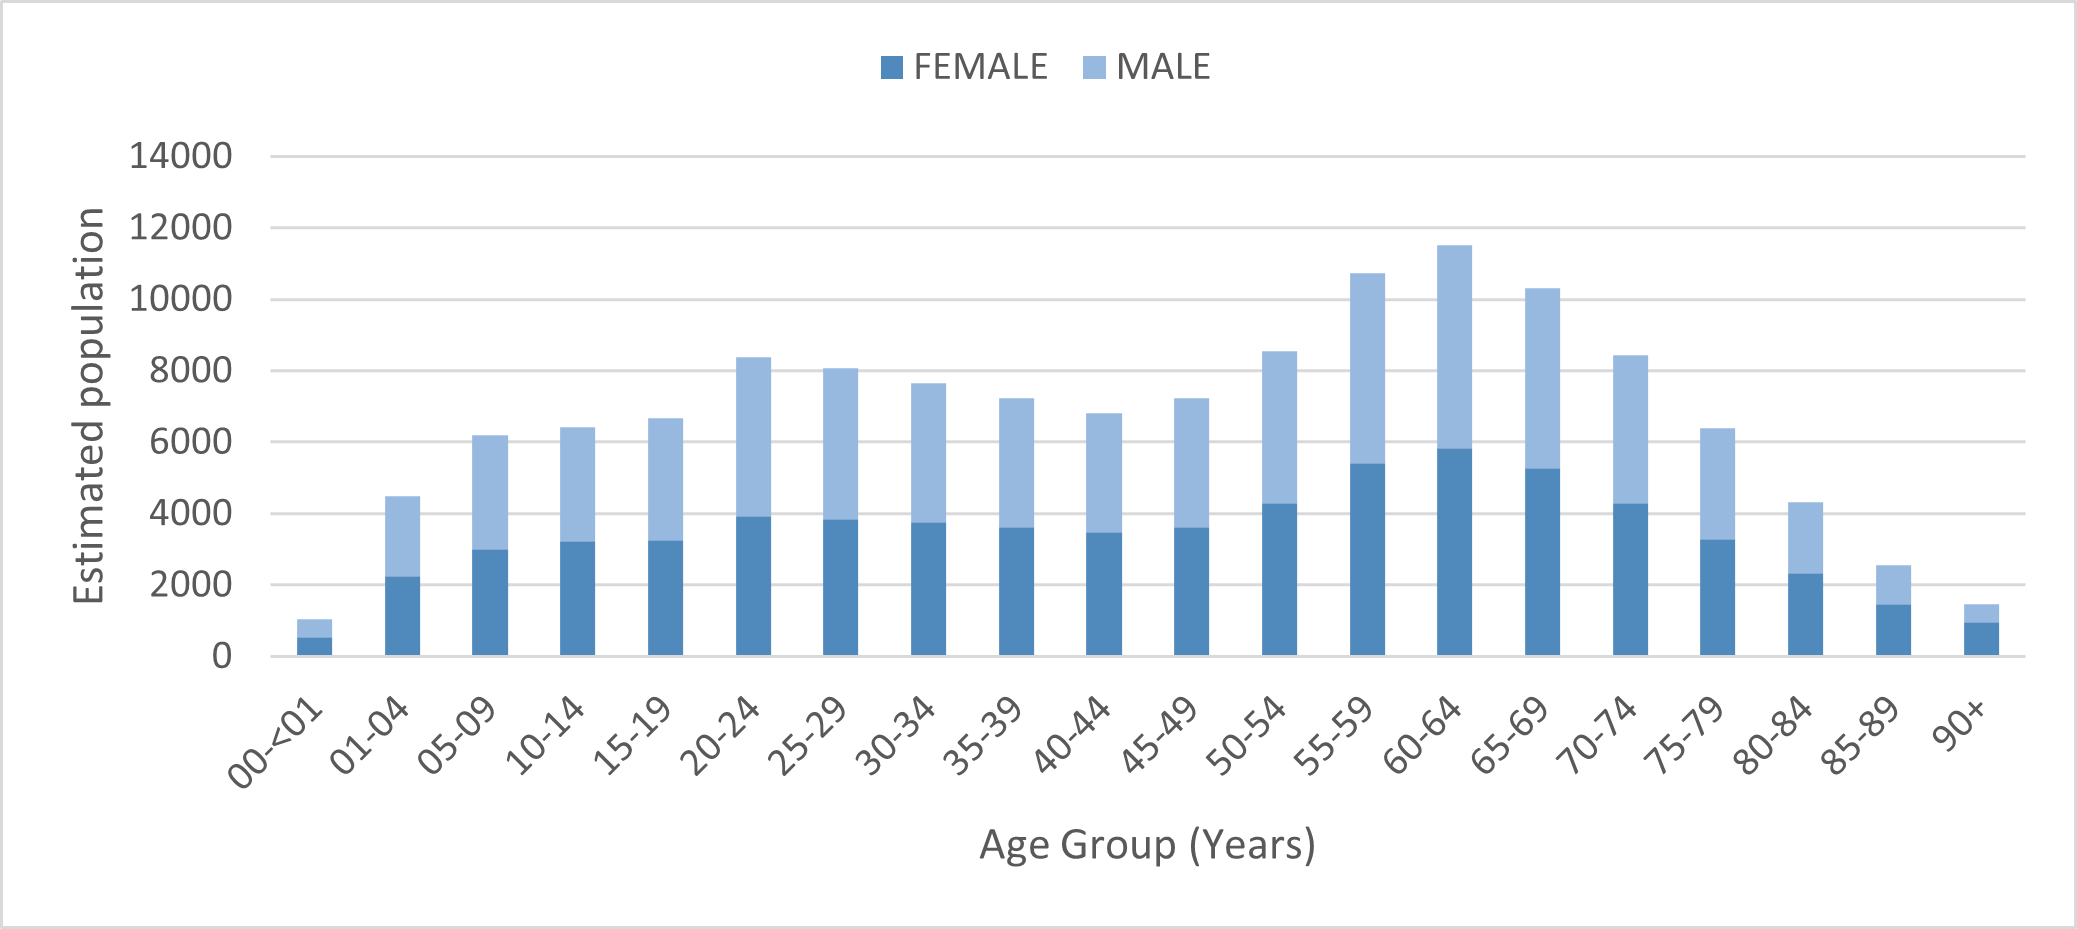 Bar graph showing the male and female population estimates for each 5 year age group